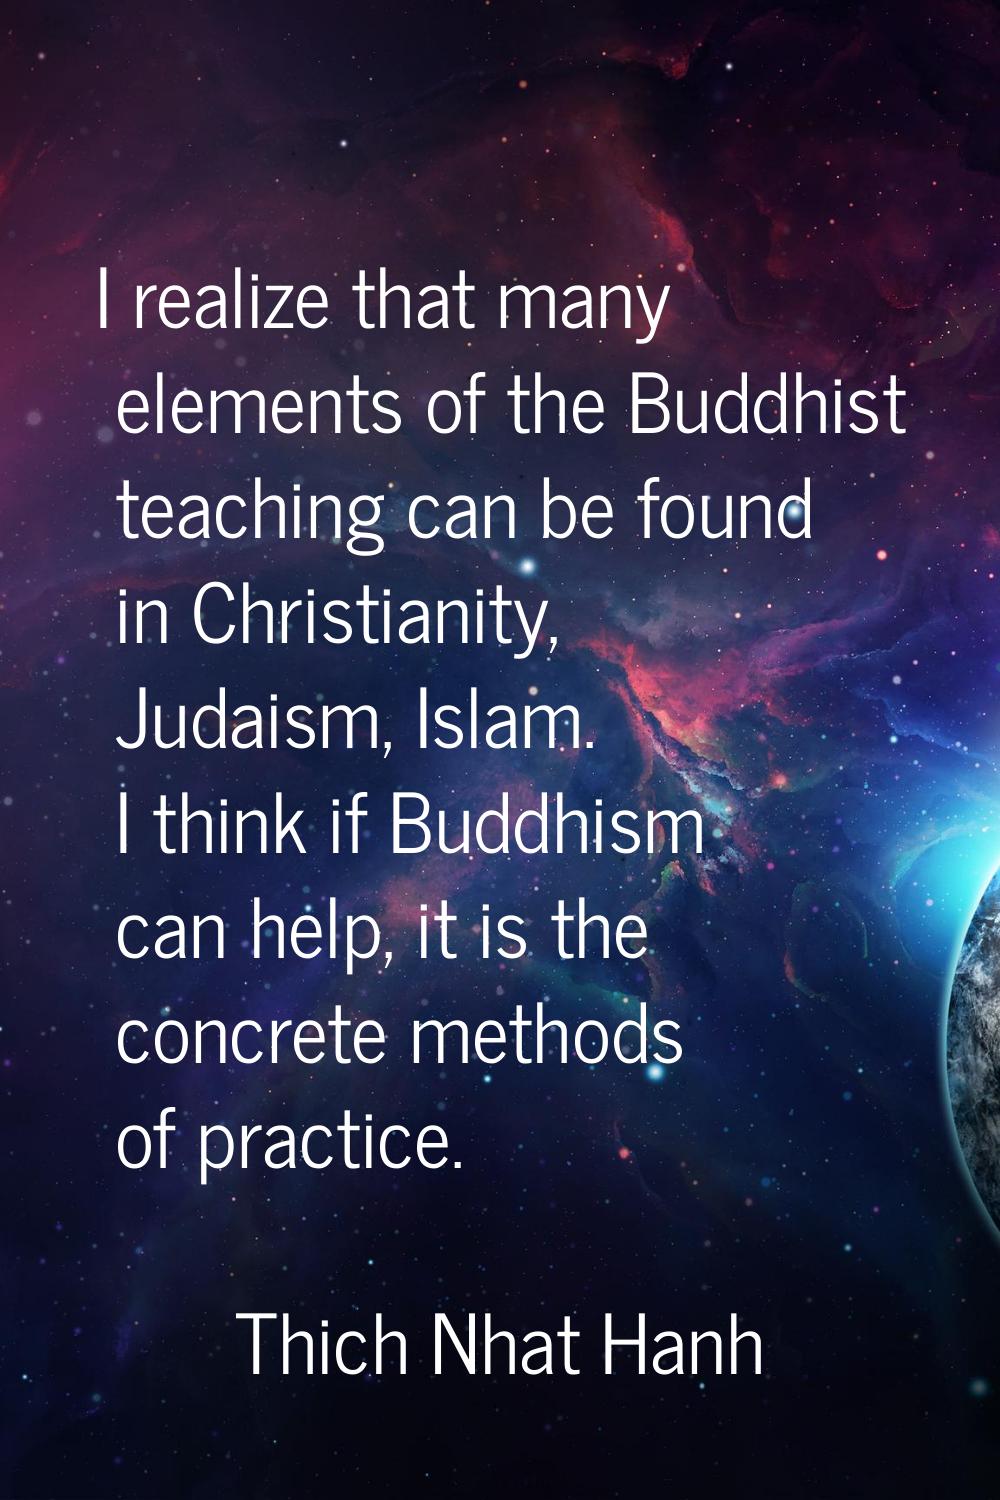 I realize that many elements of the Buddhist teaching can be found in Christianity, Judaism, Islam.